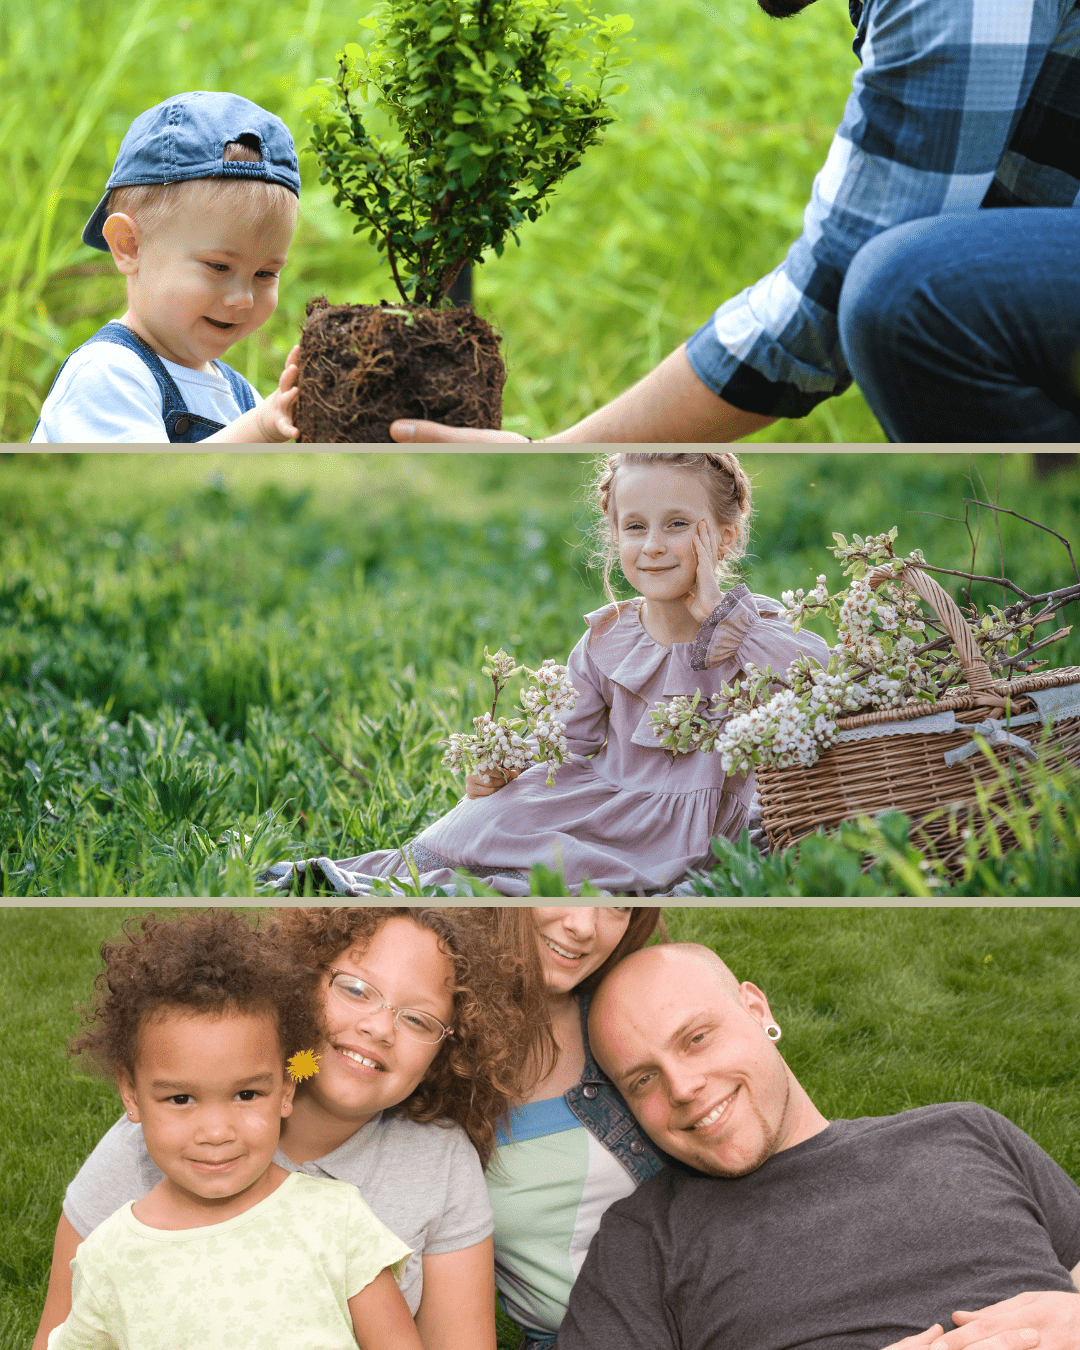 Boy toddler planting shrub with dad, 6-7 year old girl with basket of flowers. family of mixed ethnic backgrounds